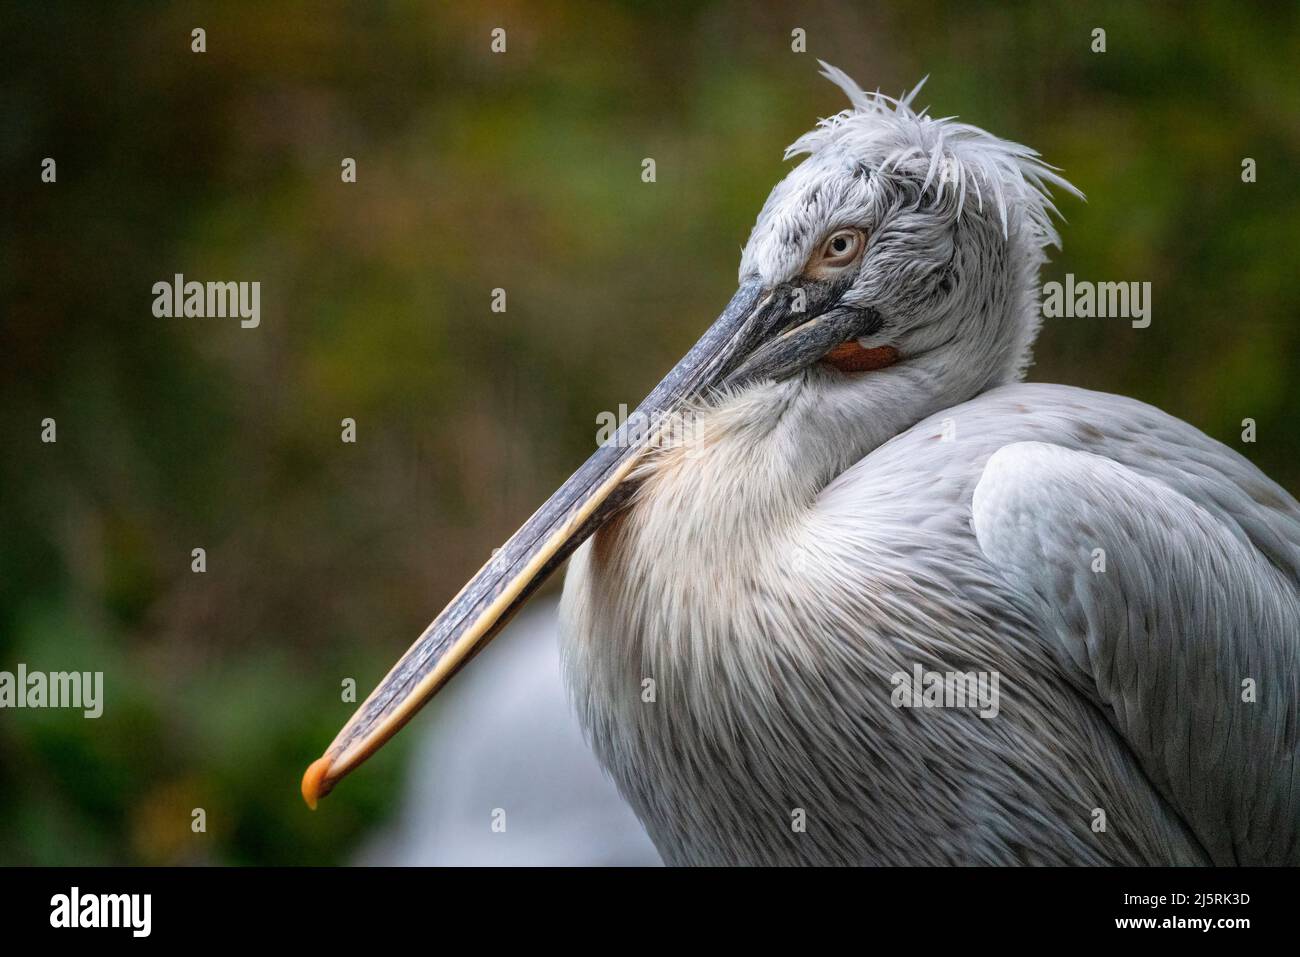 Wildlife scene from European nature. White bird, with long bill in the water. Dalmatian pelican, Pelecanus crispus. Standing on the branch. Stock Photo